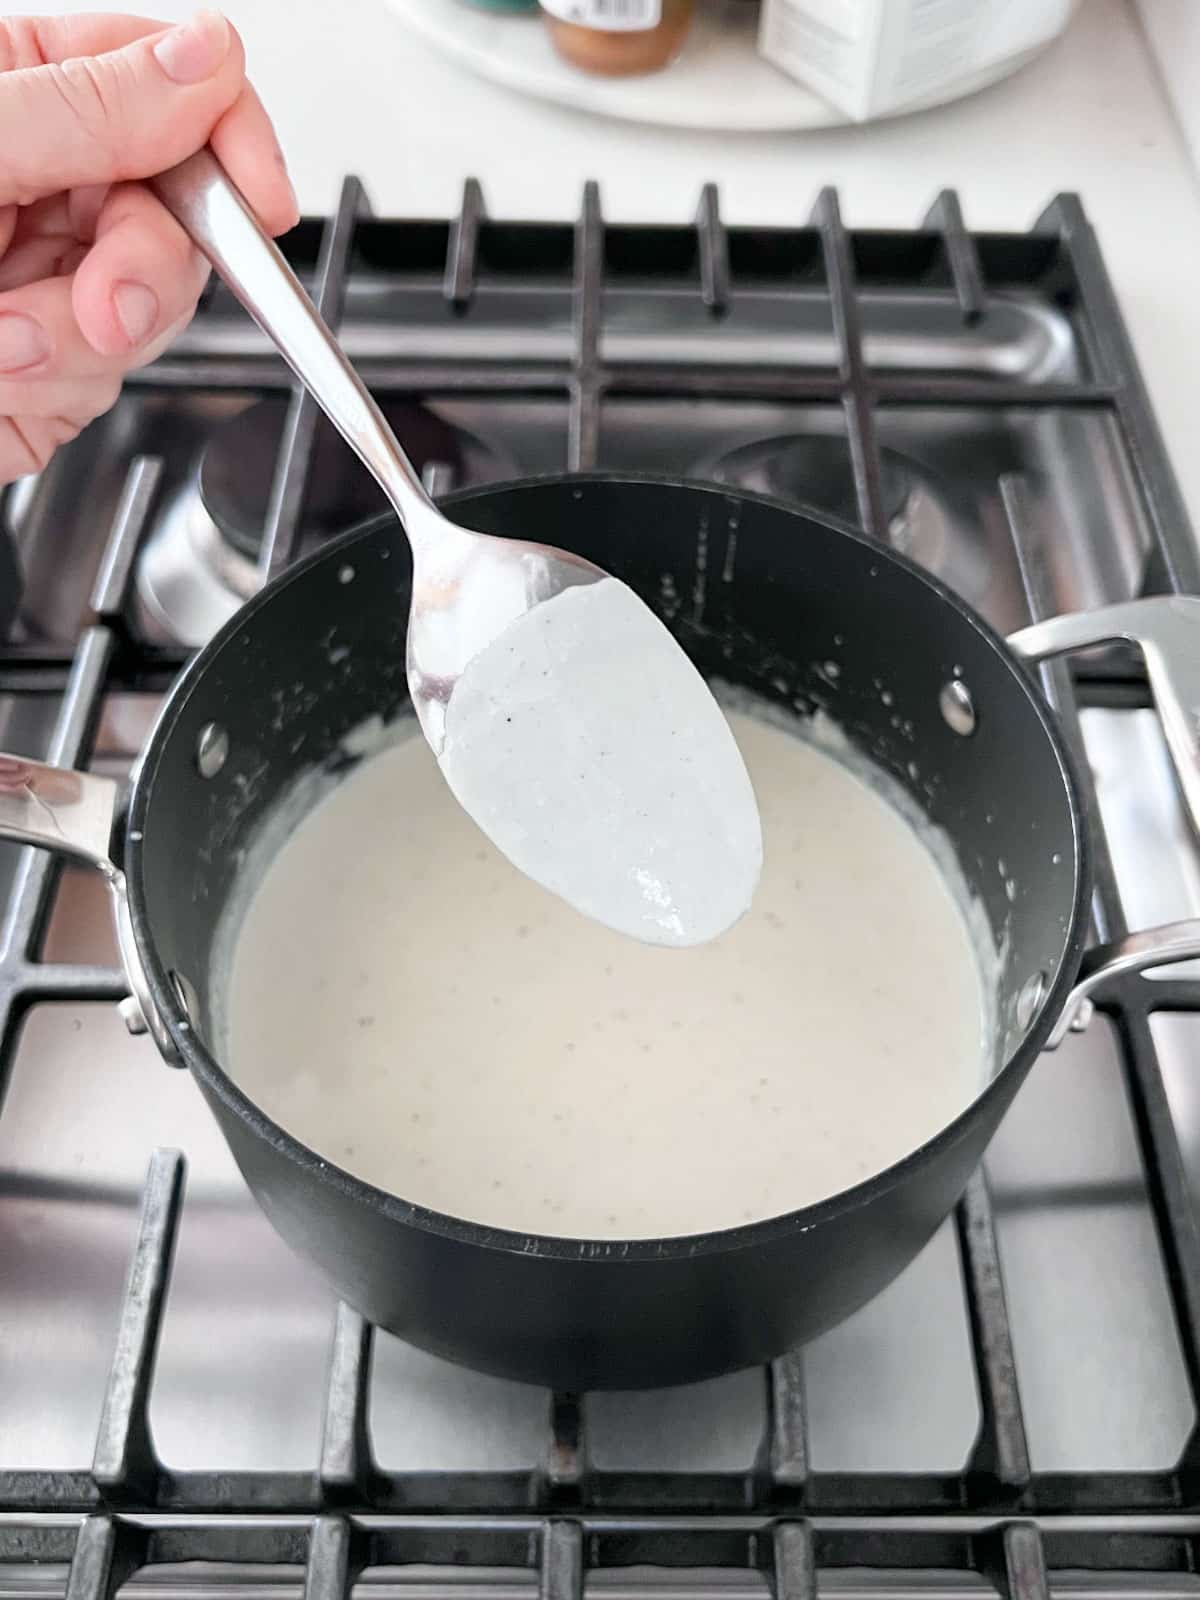 Thickened sauce in the pan with a spoon in front of it showing how the sauce coats the back of the spoon.